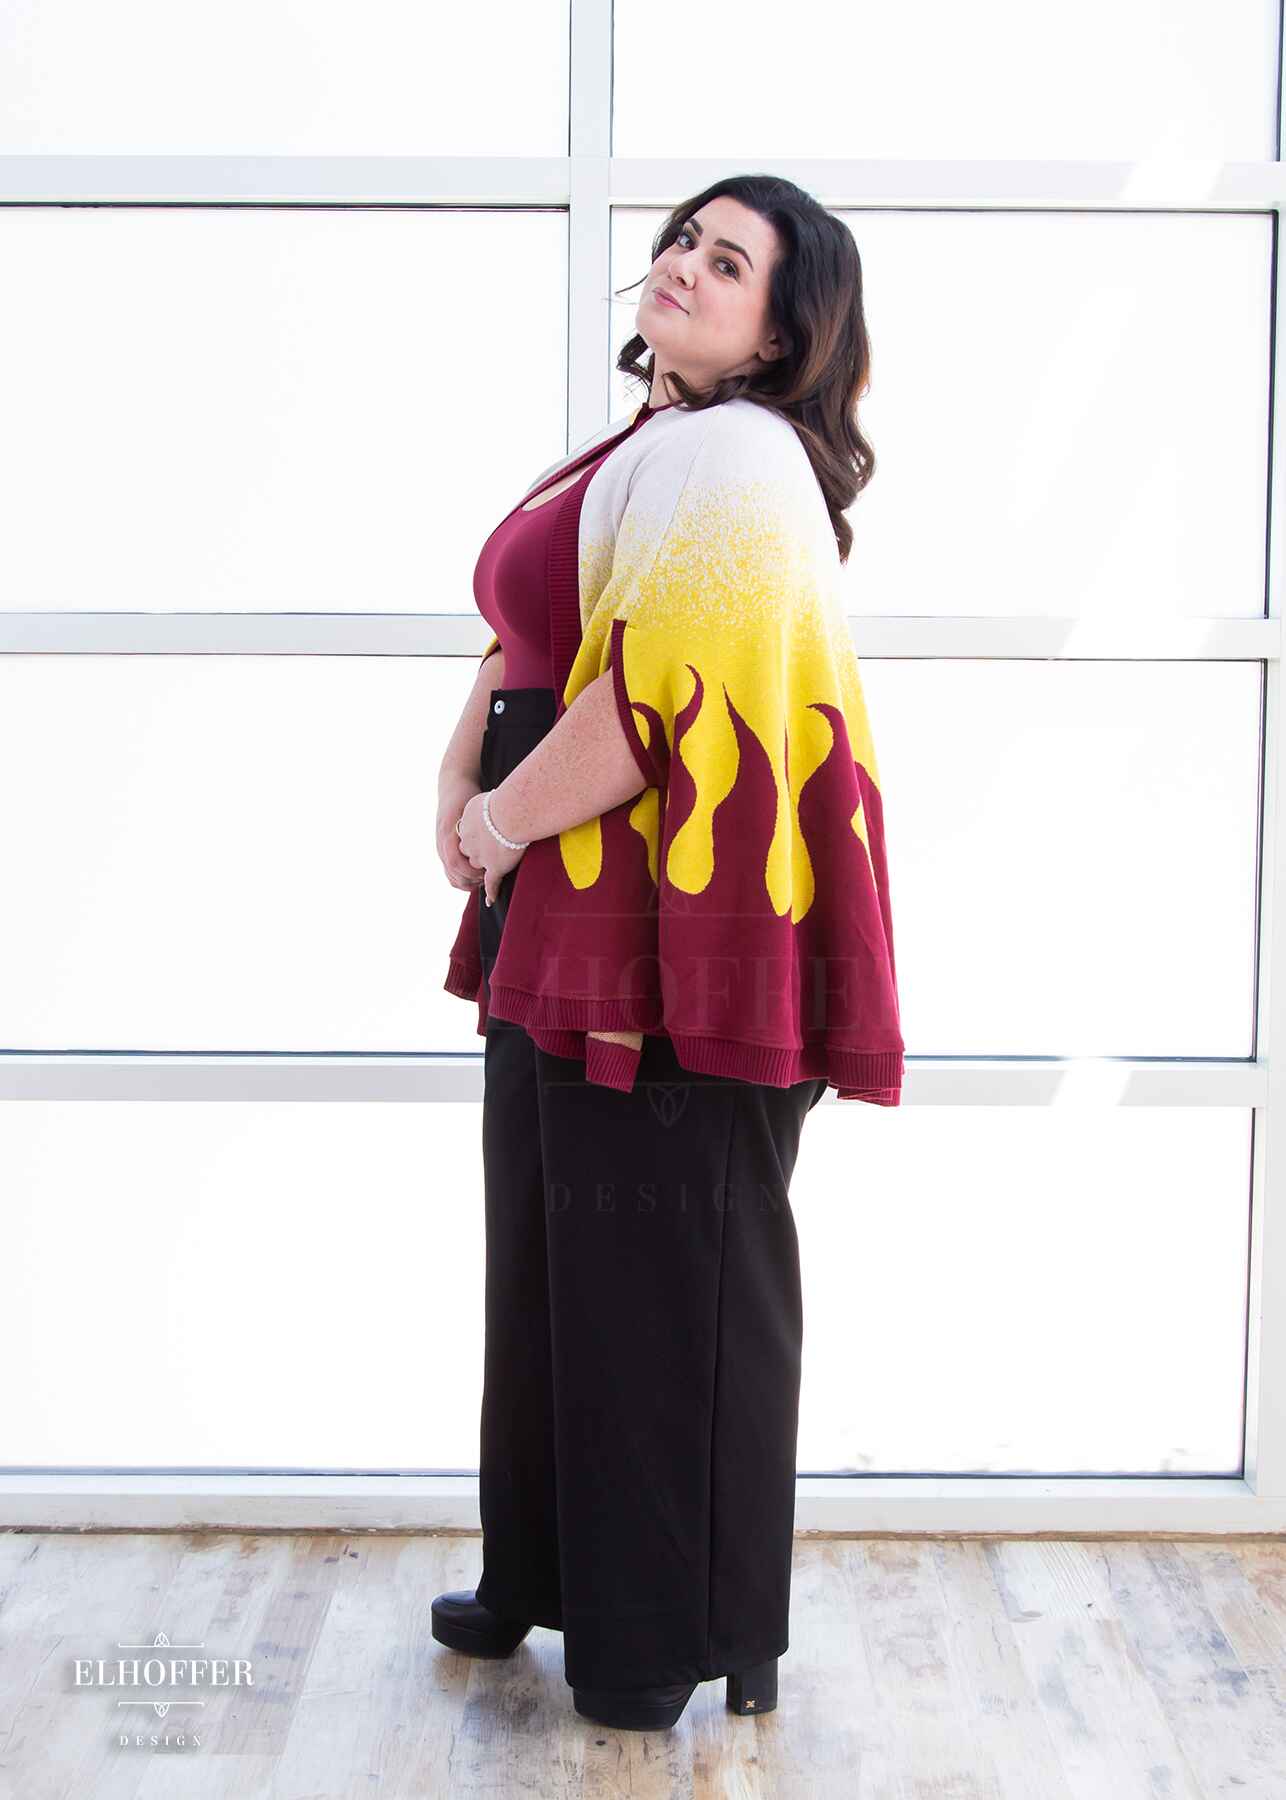 A side view of Stacy, a light skinned XL model with shoulder length wavy dark brown hair, wearing a below hip length knit cape. The cape is a gradient of color from white at the shoulders, to yellow, to a red fire design at the bottom, it also has a button closer at the neck, and armholes in the side seam. She paired the cape with a burgundy scoop neck crop top and black pleated trousers.